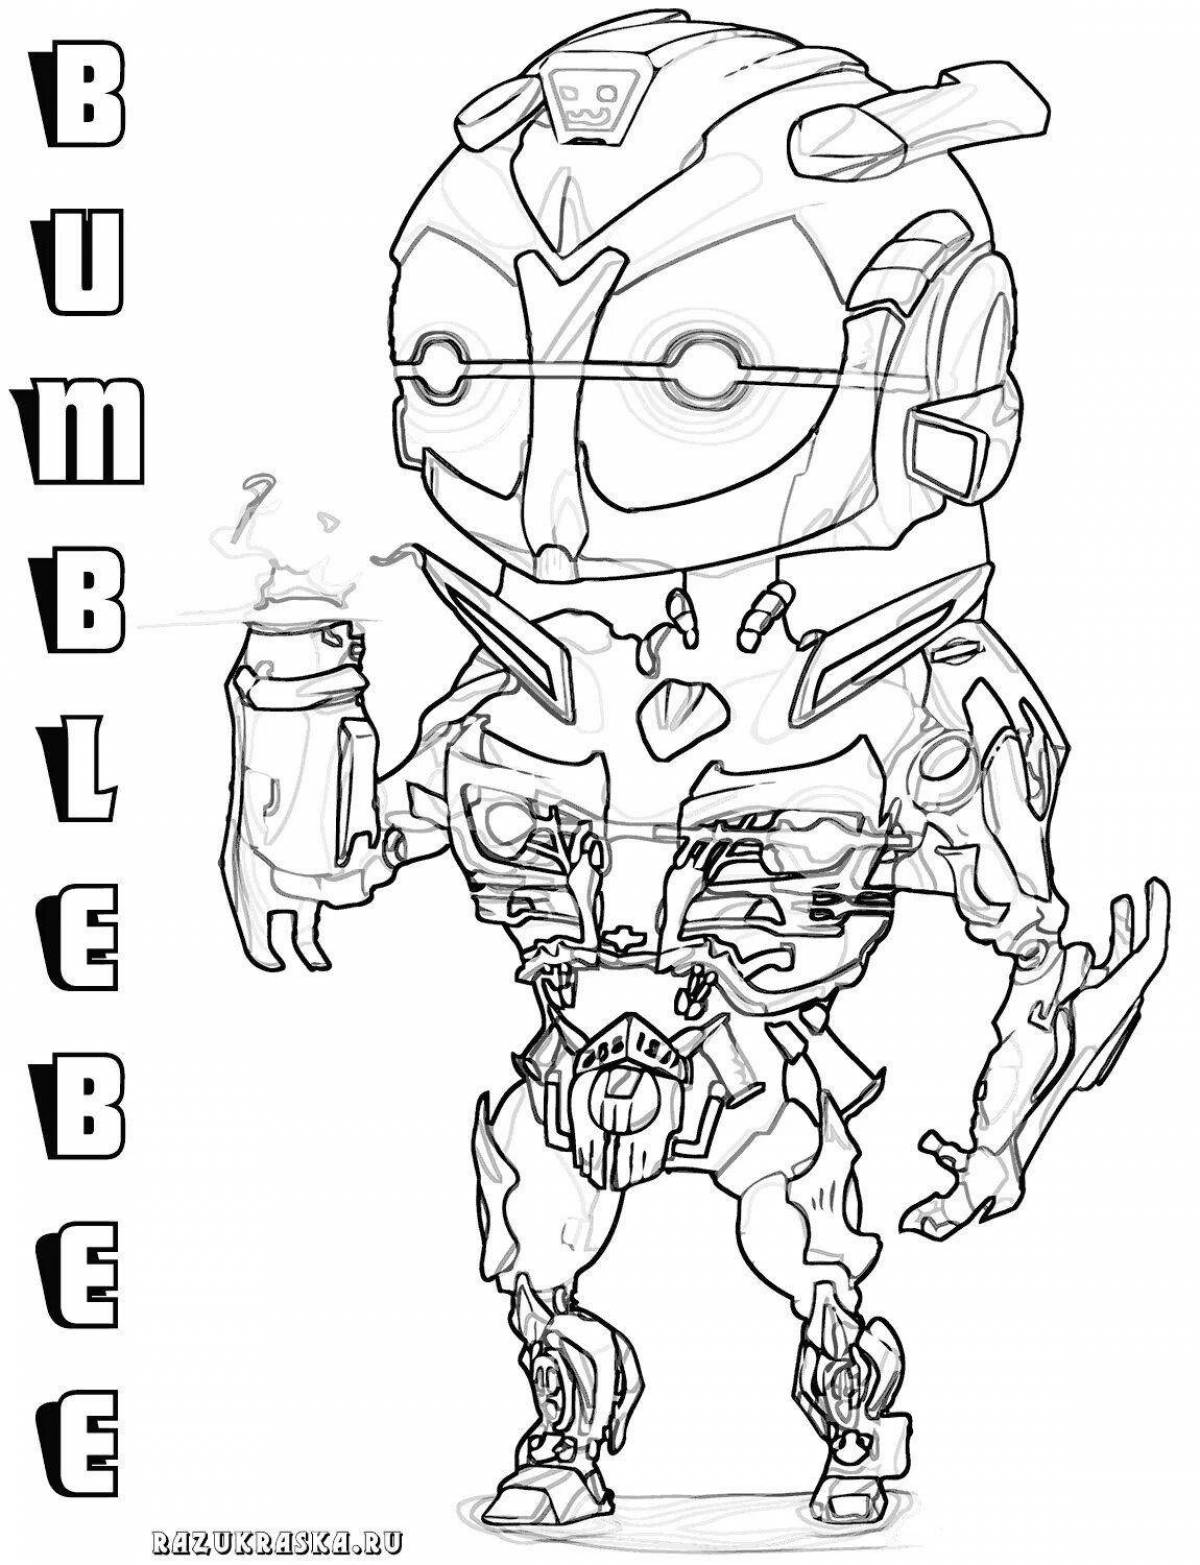 Attractive bumblebee coloring page